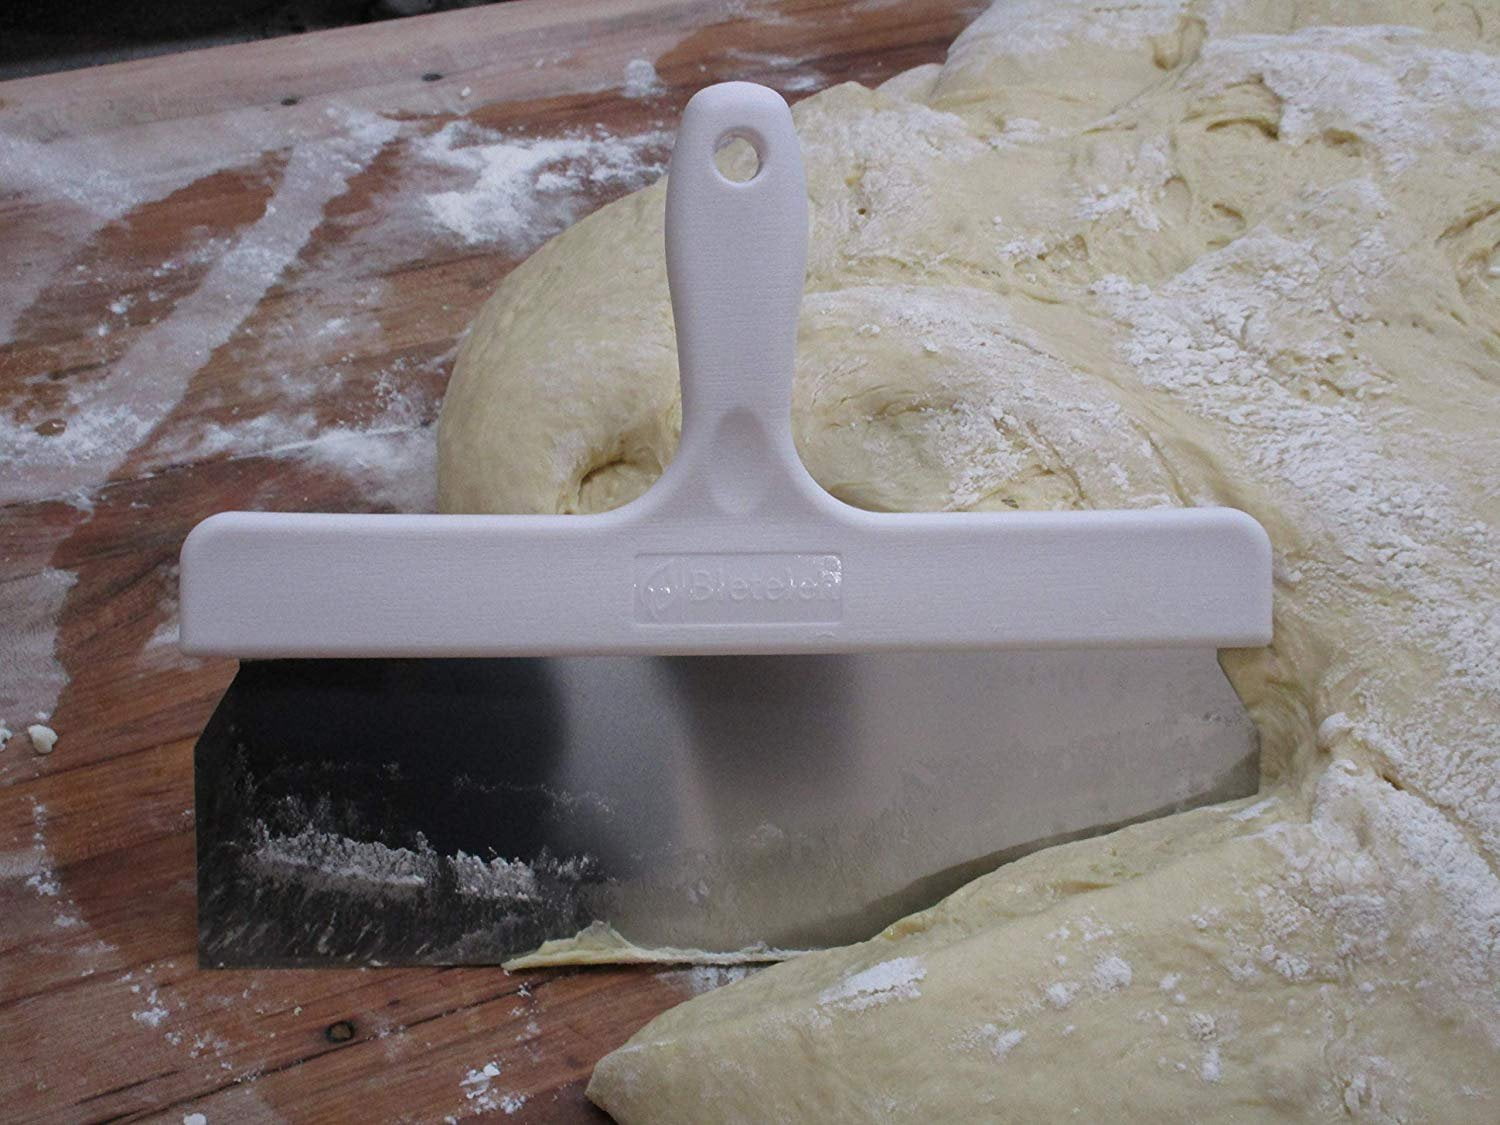 Bleteleh Extra Large commercial dough cutter/bench scraper 3.5 x 10-inch  stai